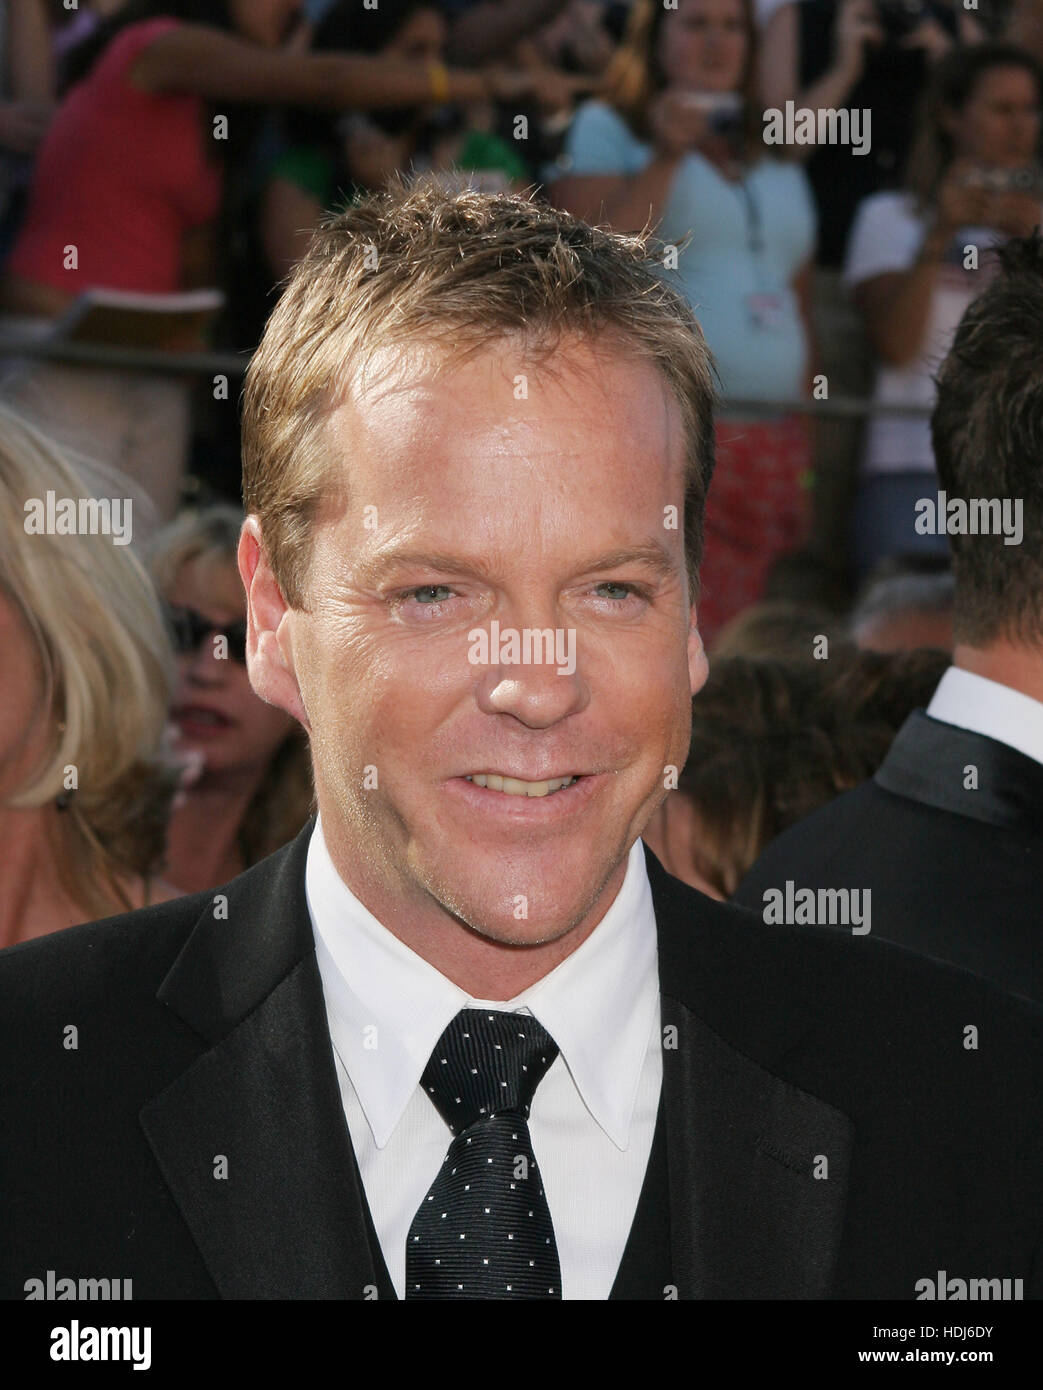 Kiefer Sutherland at the 56th Annual Emmy Awards  on September 19, 2004 in Los Angeles, California. Photo credit: Francis Specker Stock Photo